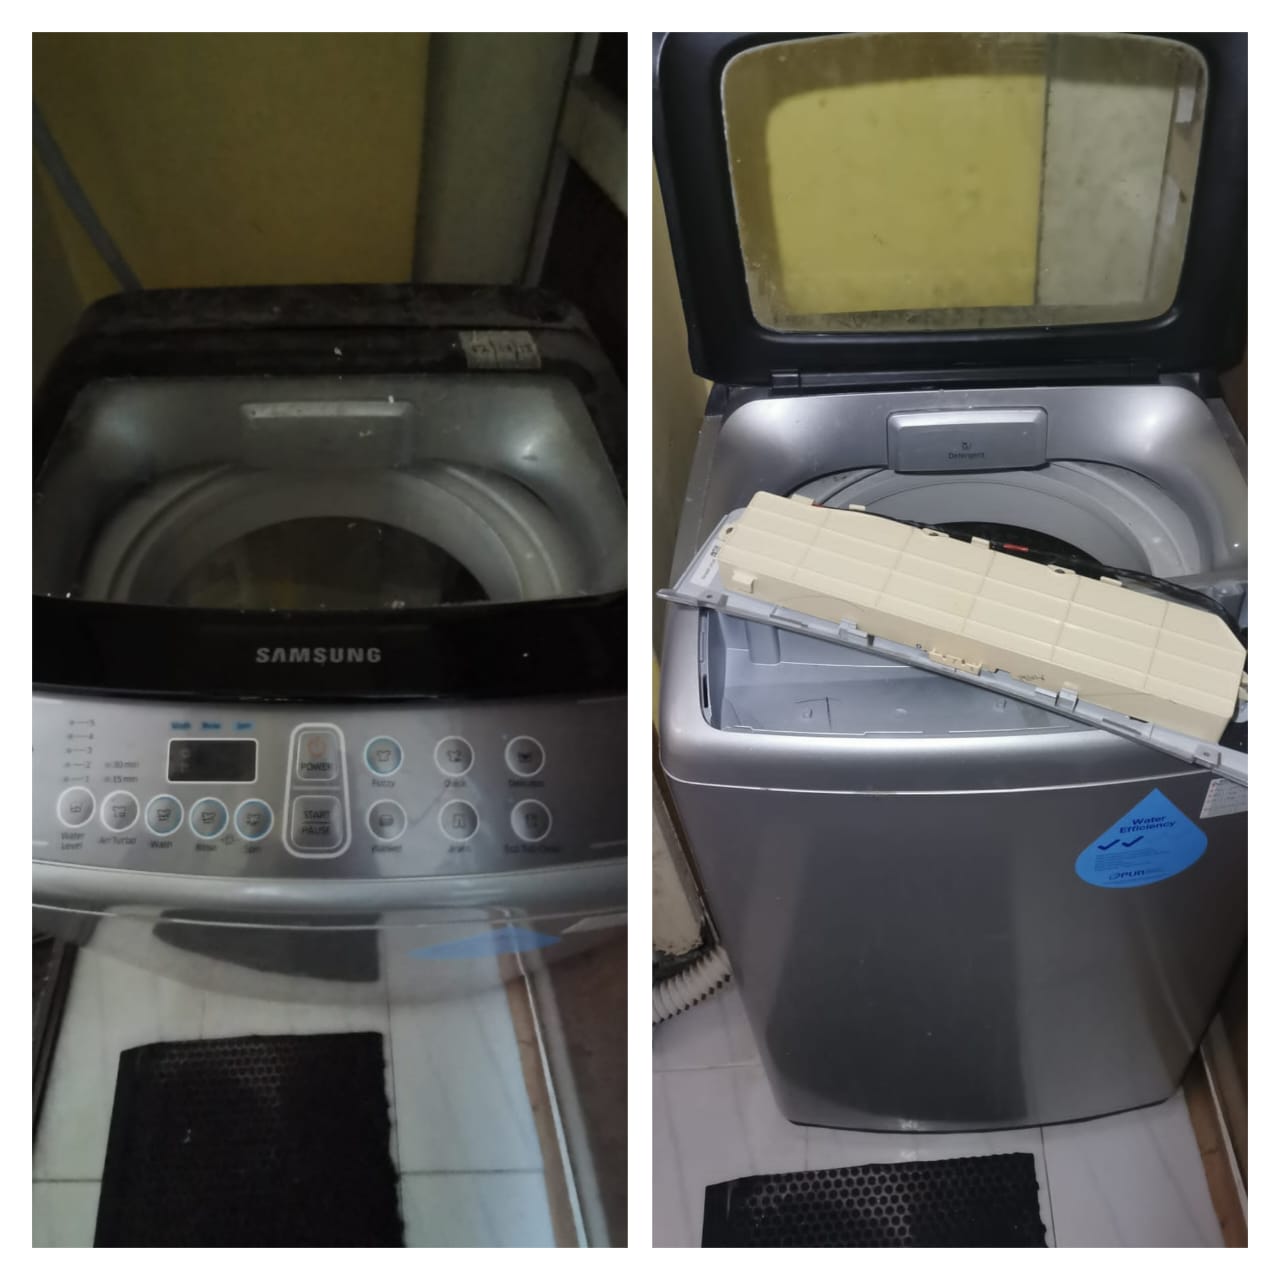 B&A 96 Washing Machine Checking For Control Panel Issue